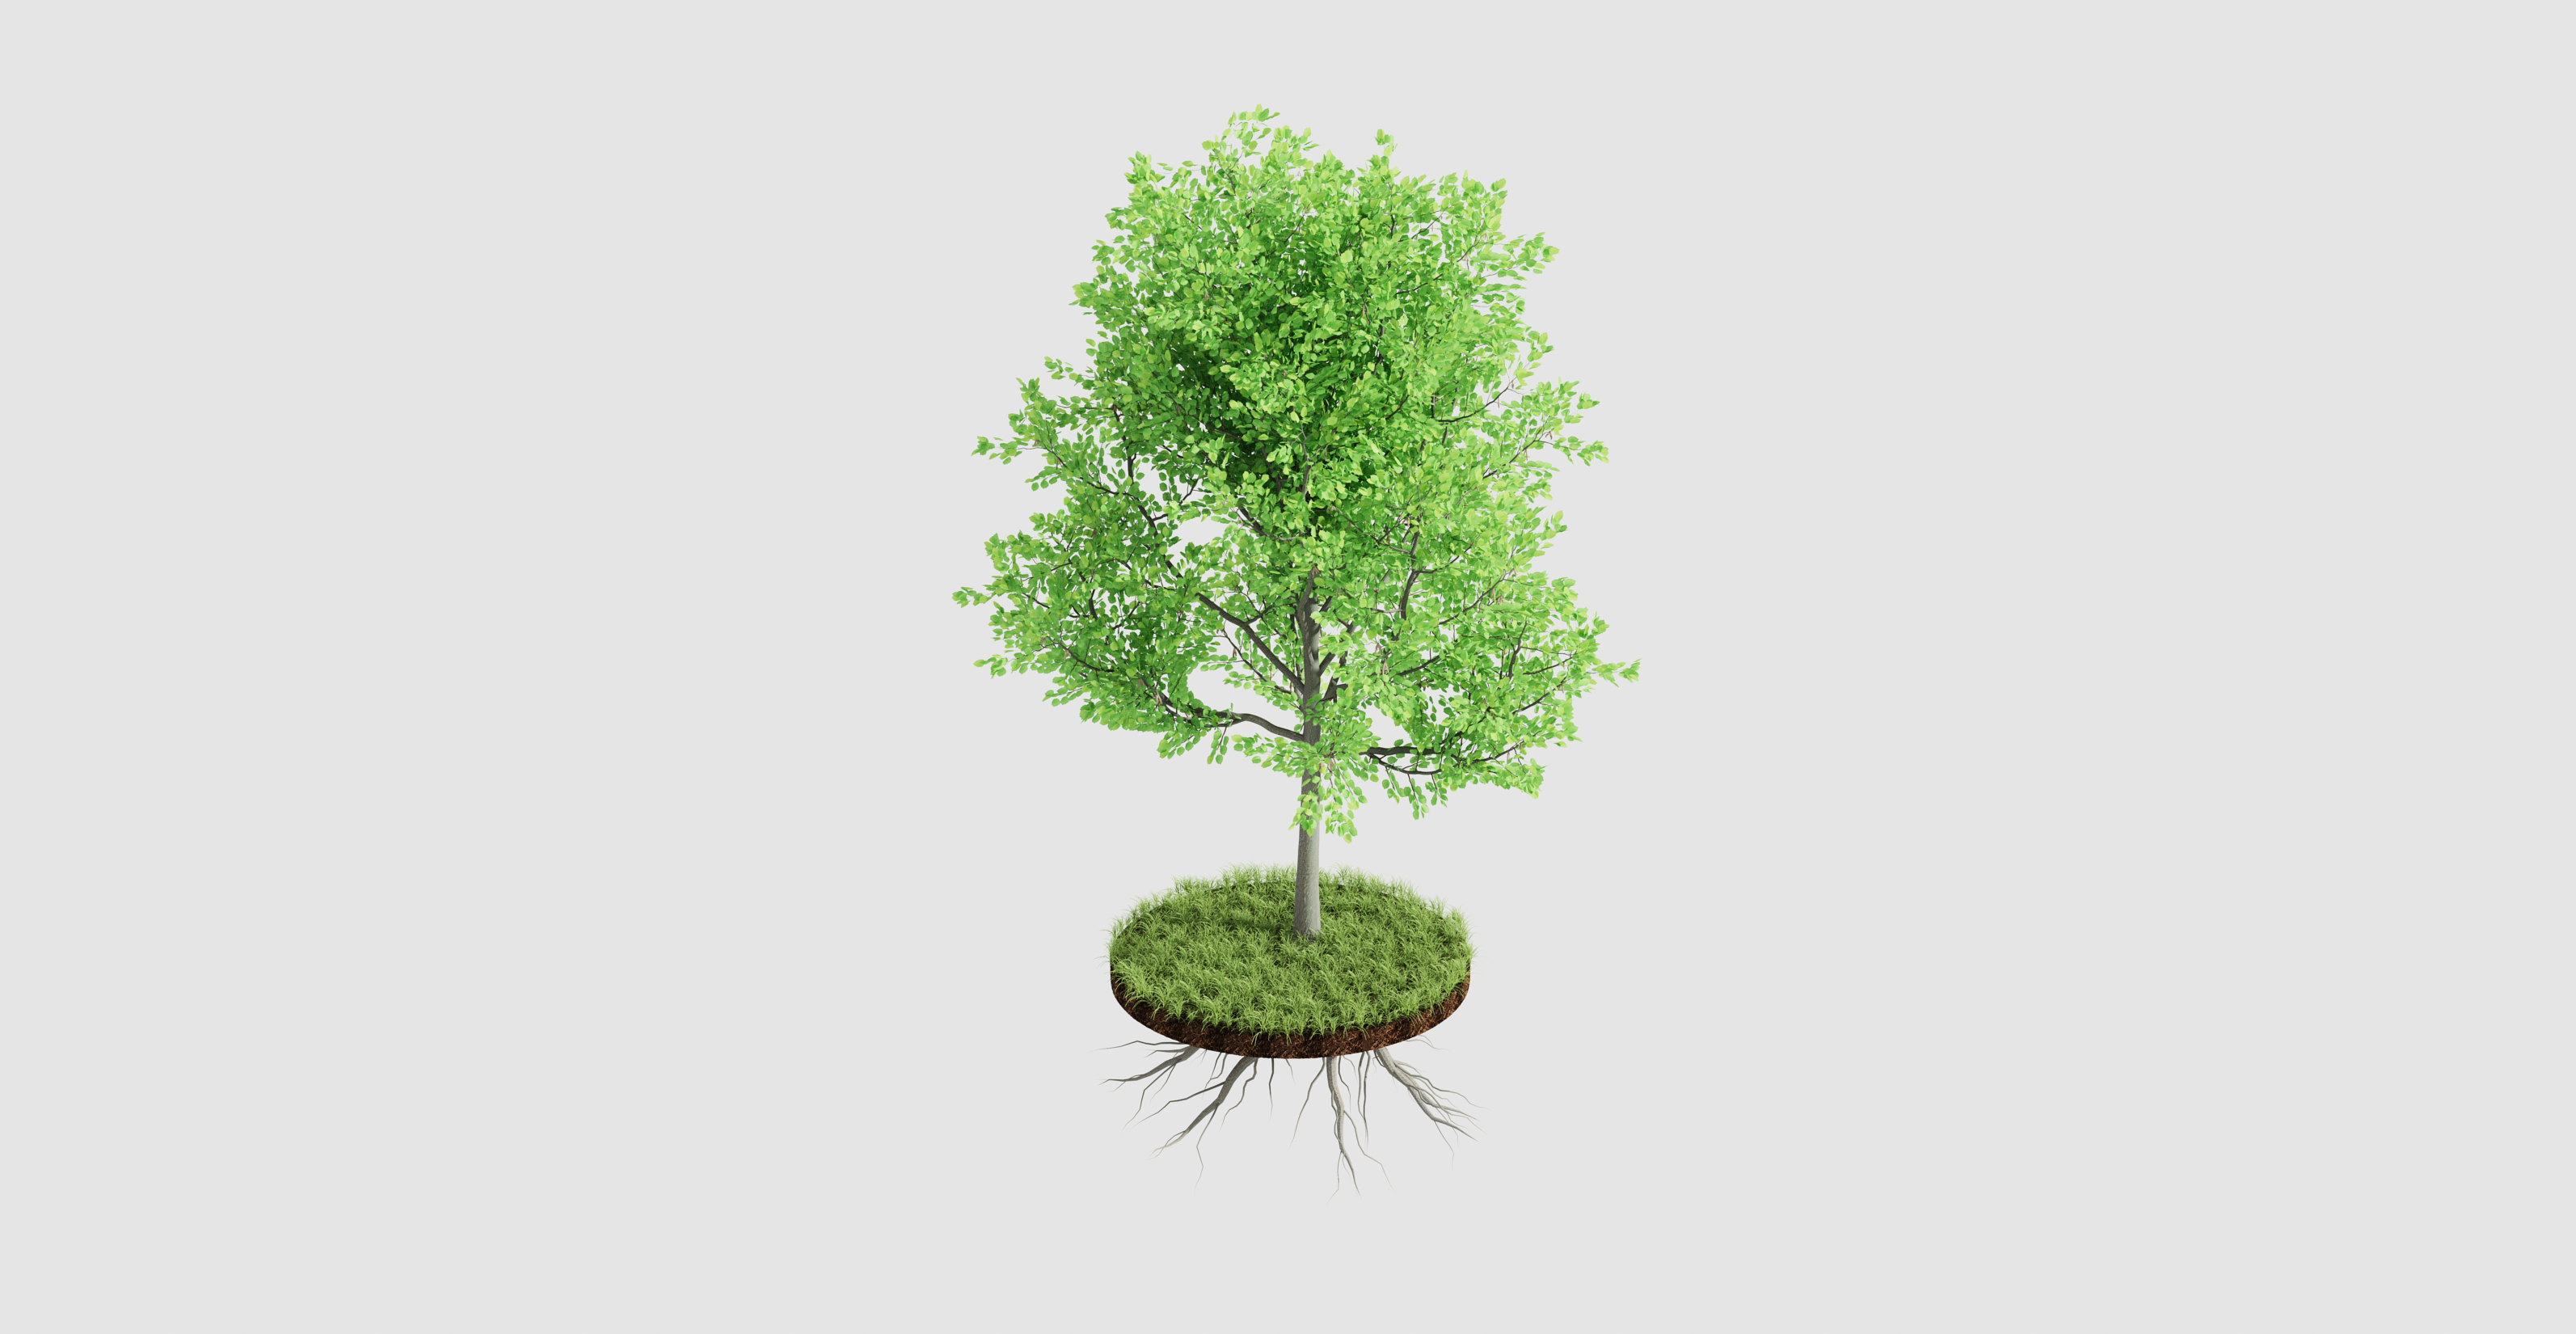 A rendered scene of a tree and grass